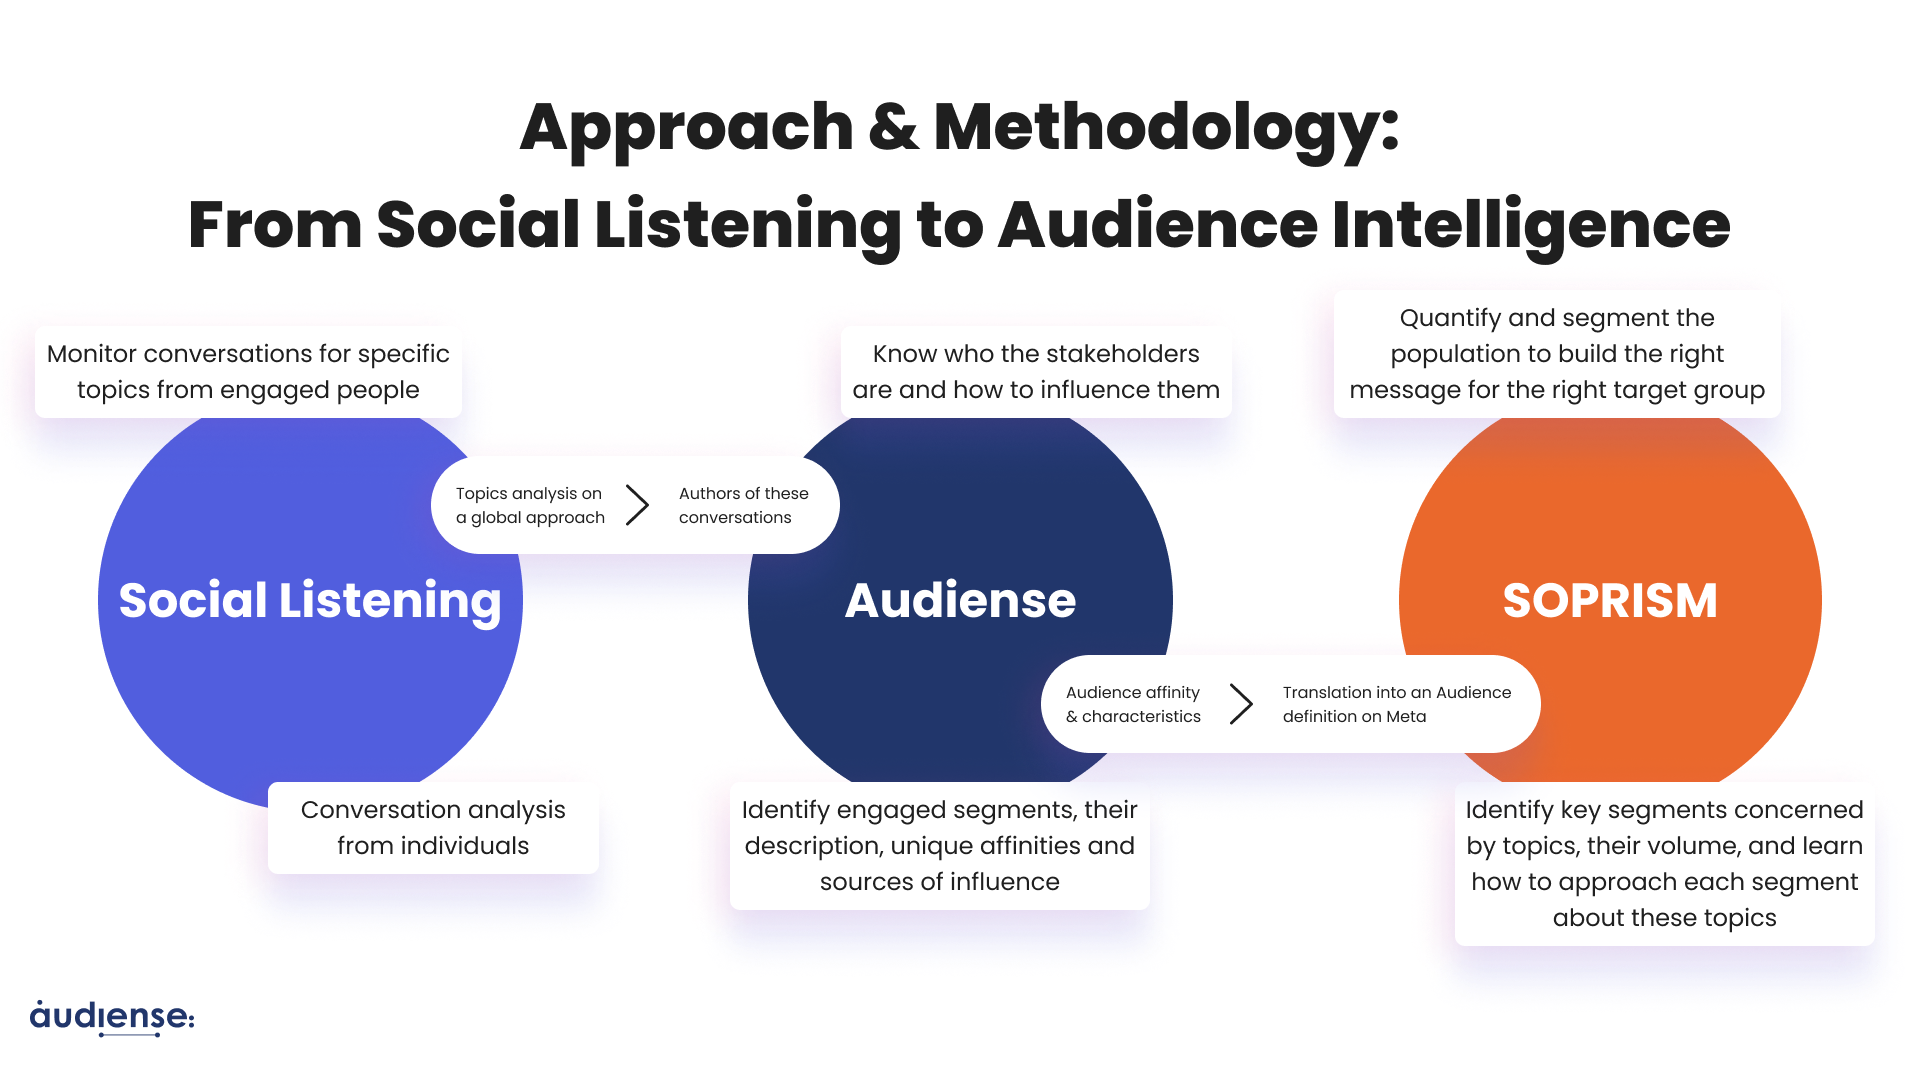 Approach and methodology to combine social and audience intelligence